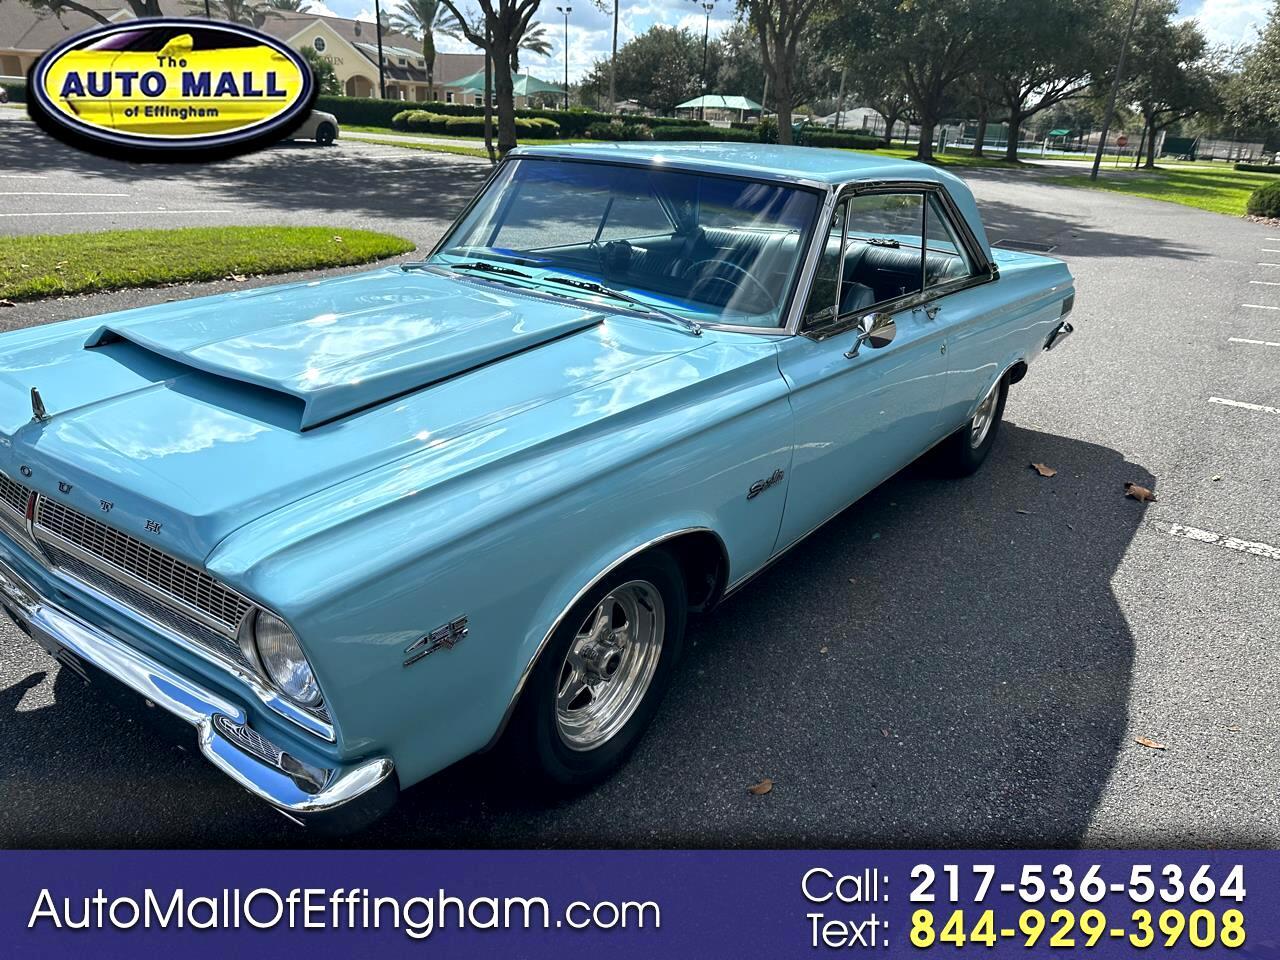 For Sale: 1965 Plymouth Satellite in Effingham, Illinois for sale in Effingham, IL